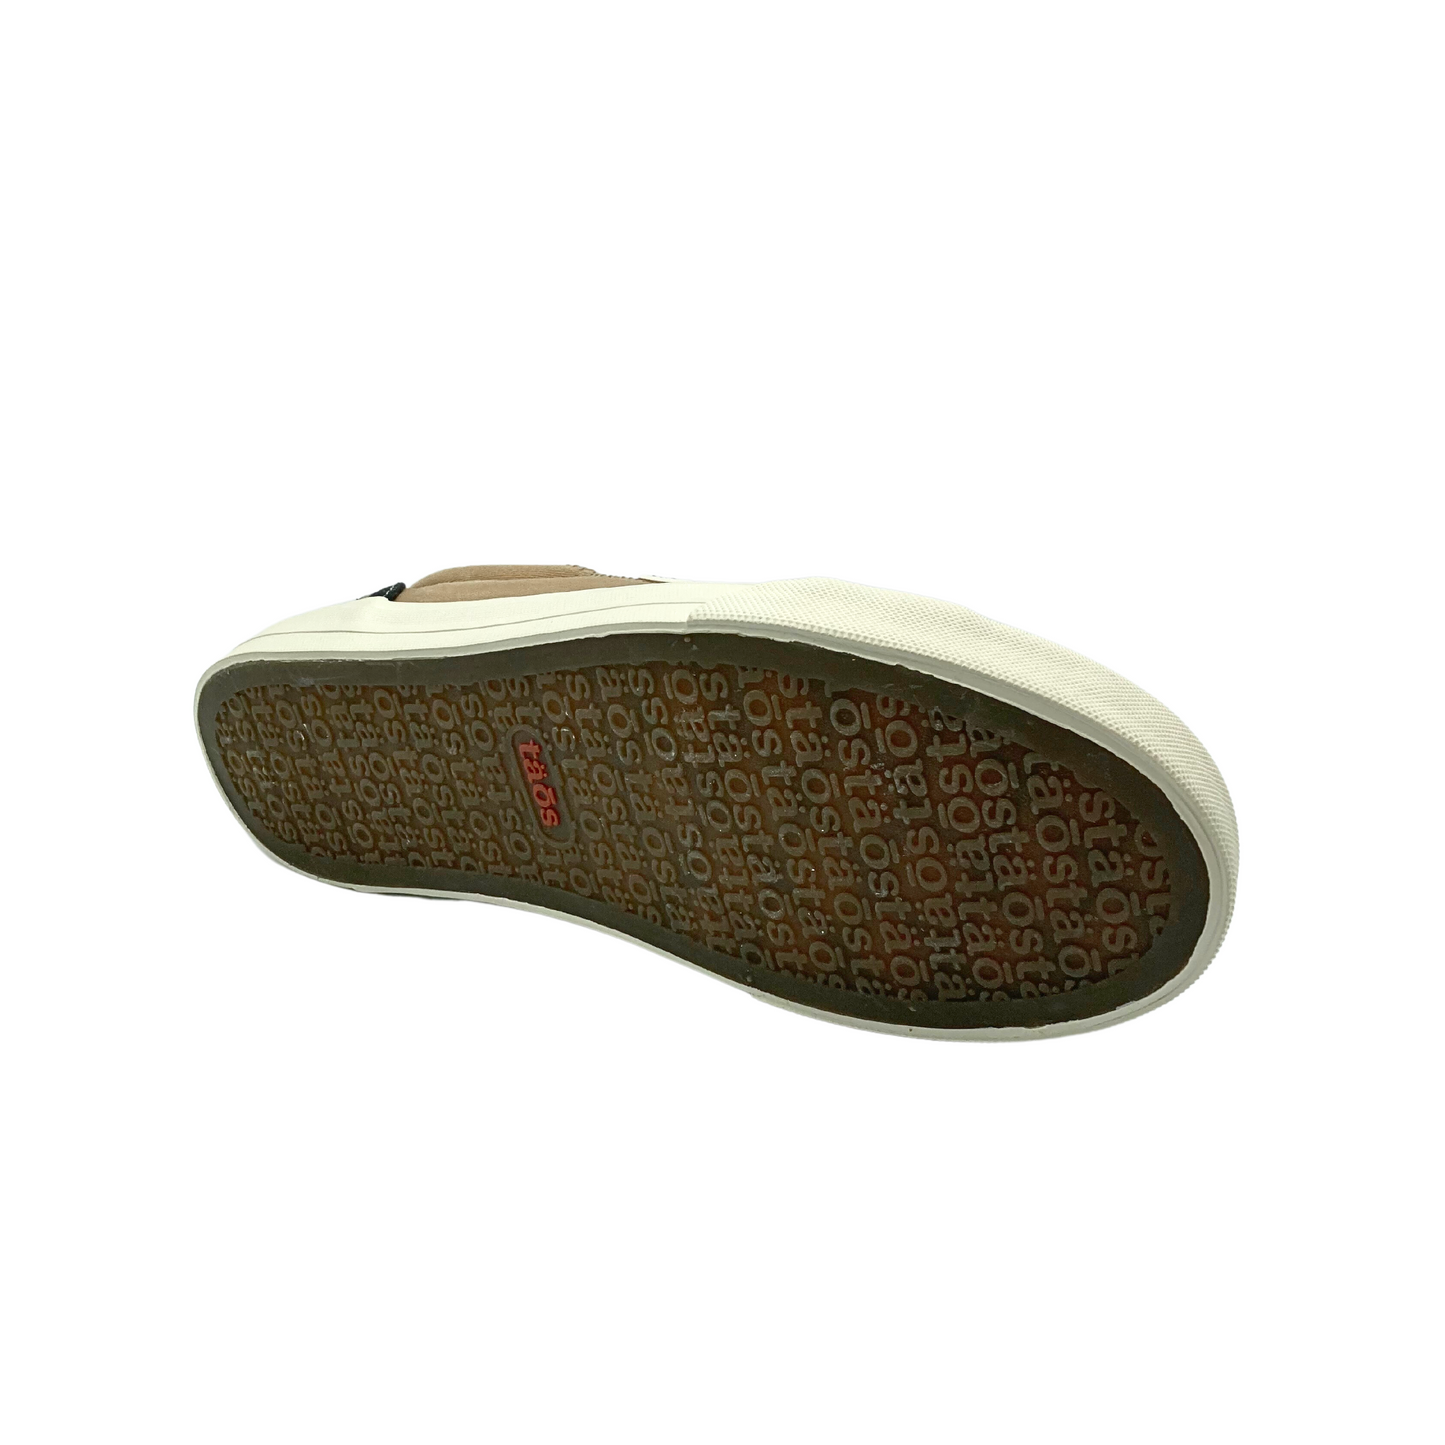 Bottom view of right shoe.  Flexible, durable rubber outsole.